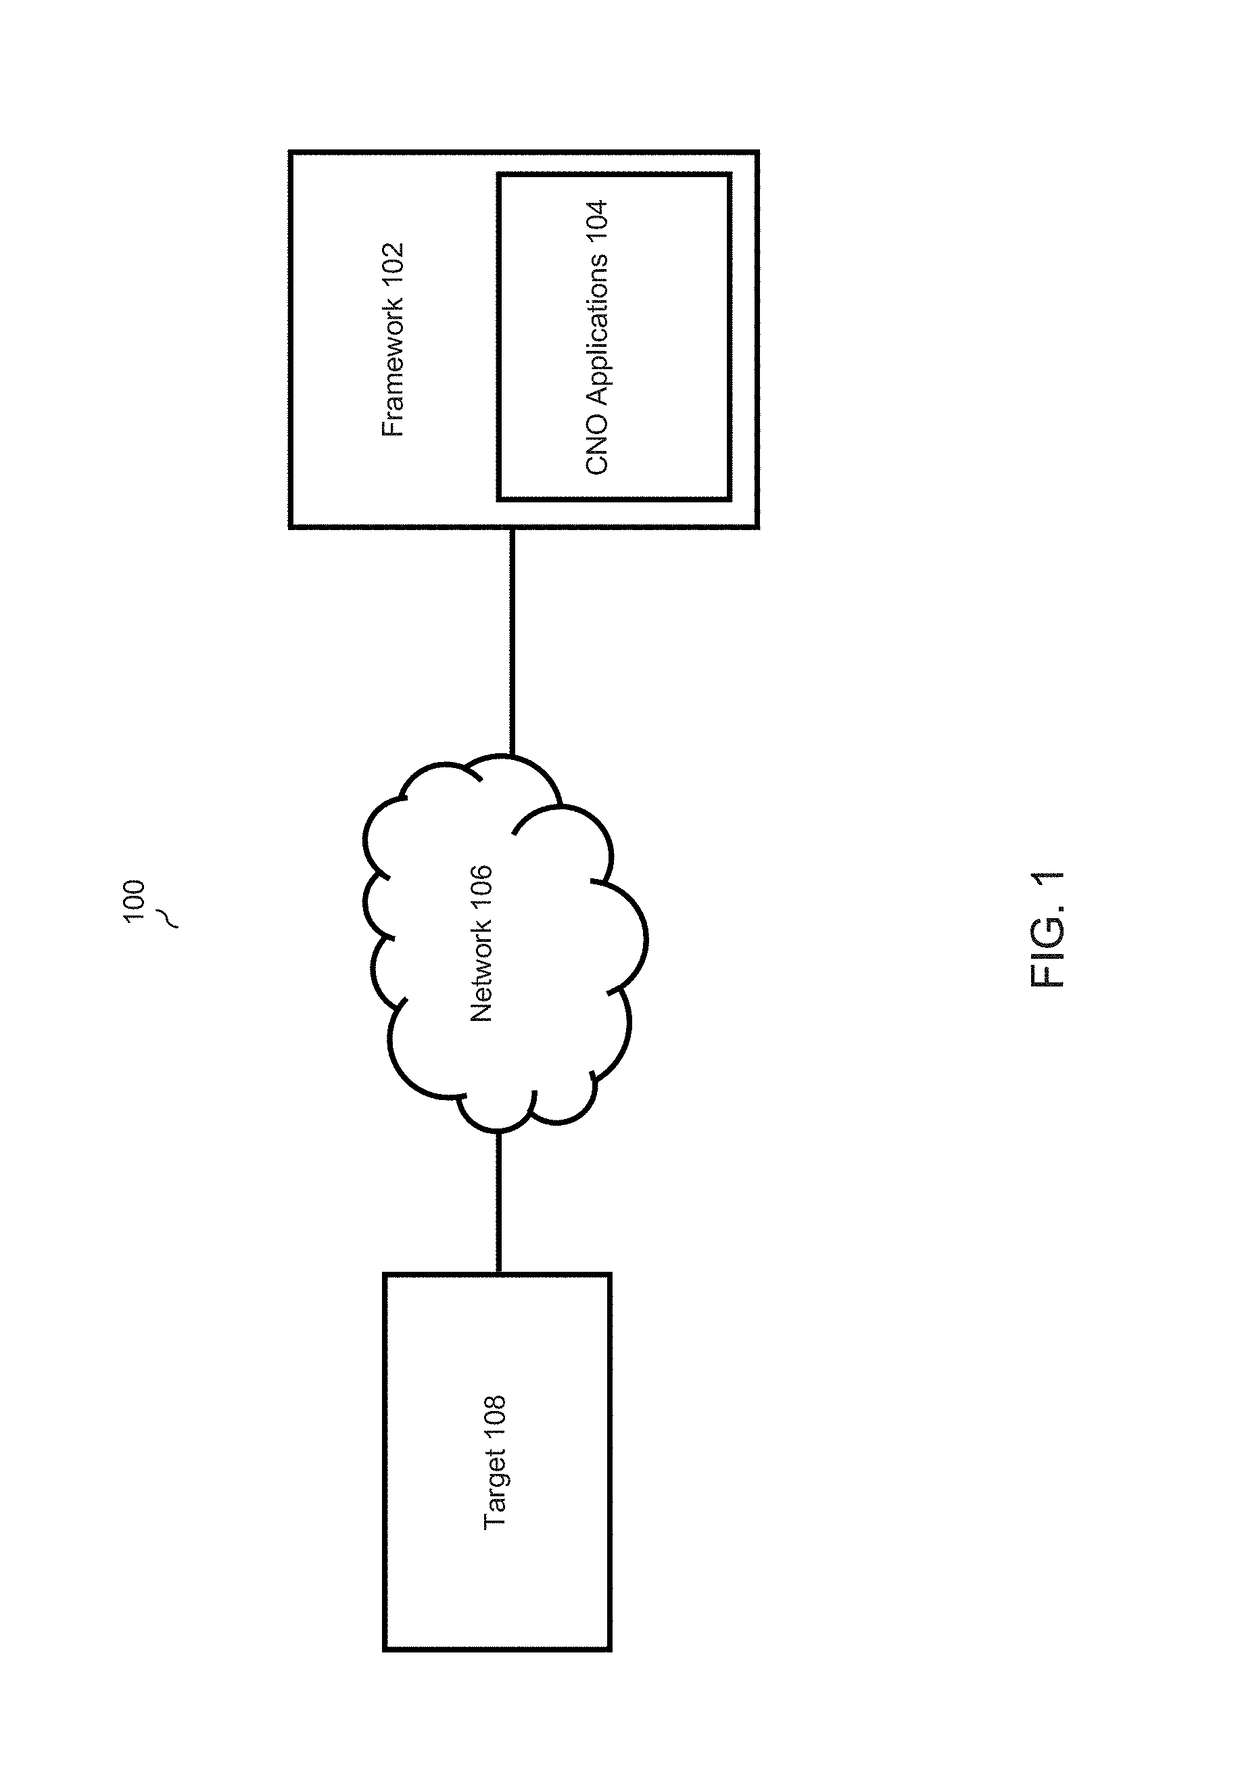 Systems and methods for optimizing computer network operations